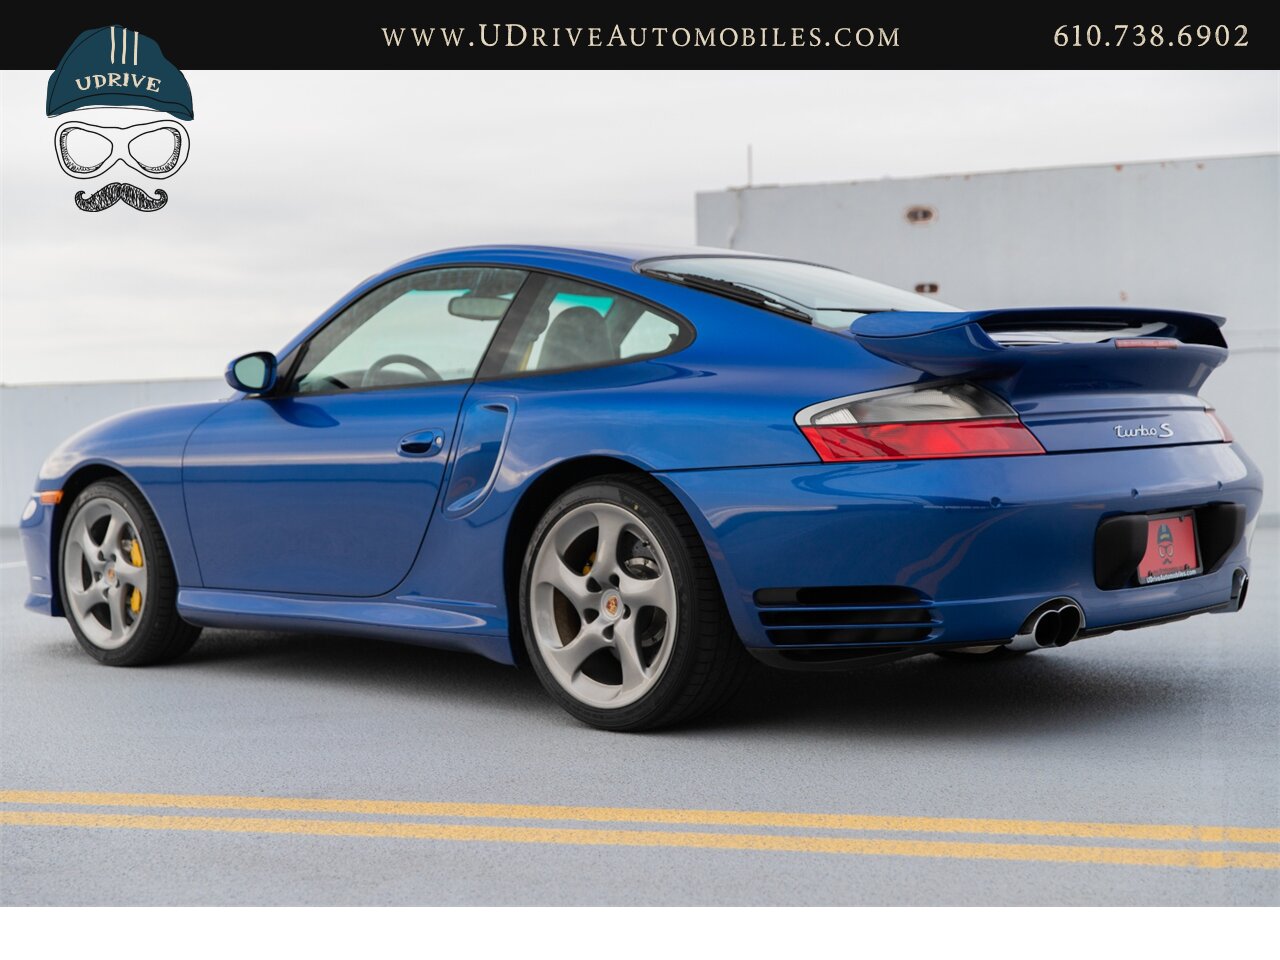 2005 Porsche 911 Turbo S Factory Aerokit Extremely Rare Cobalt Blue  Yellow Deviating Stitching 1 of a Kind Spec $160k MSRP - Photo 24 - West Chester, PA 19382